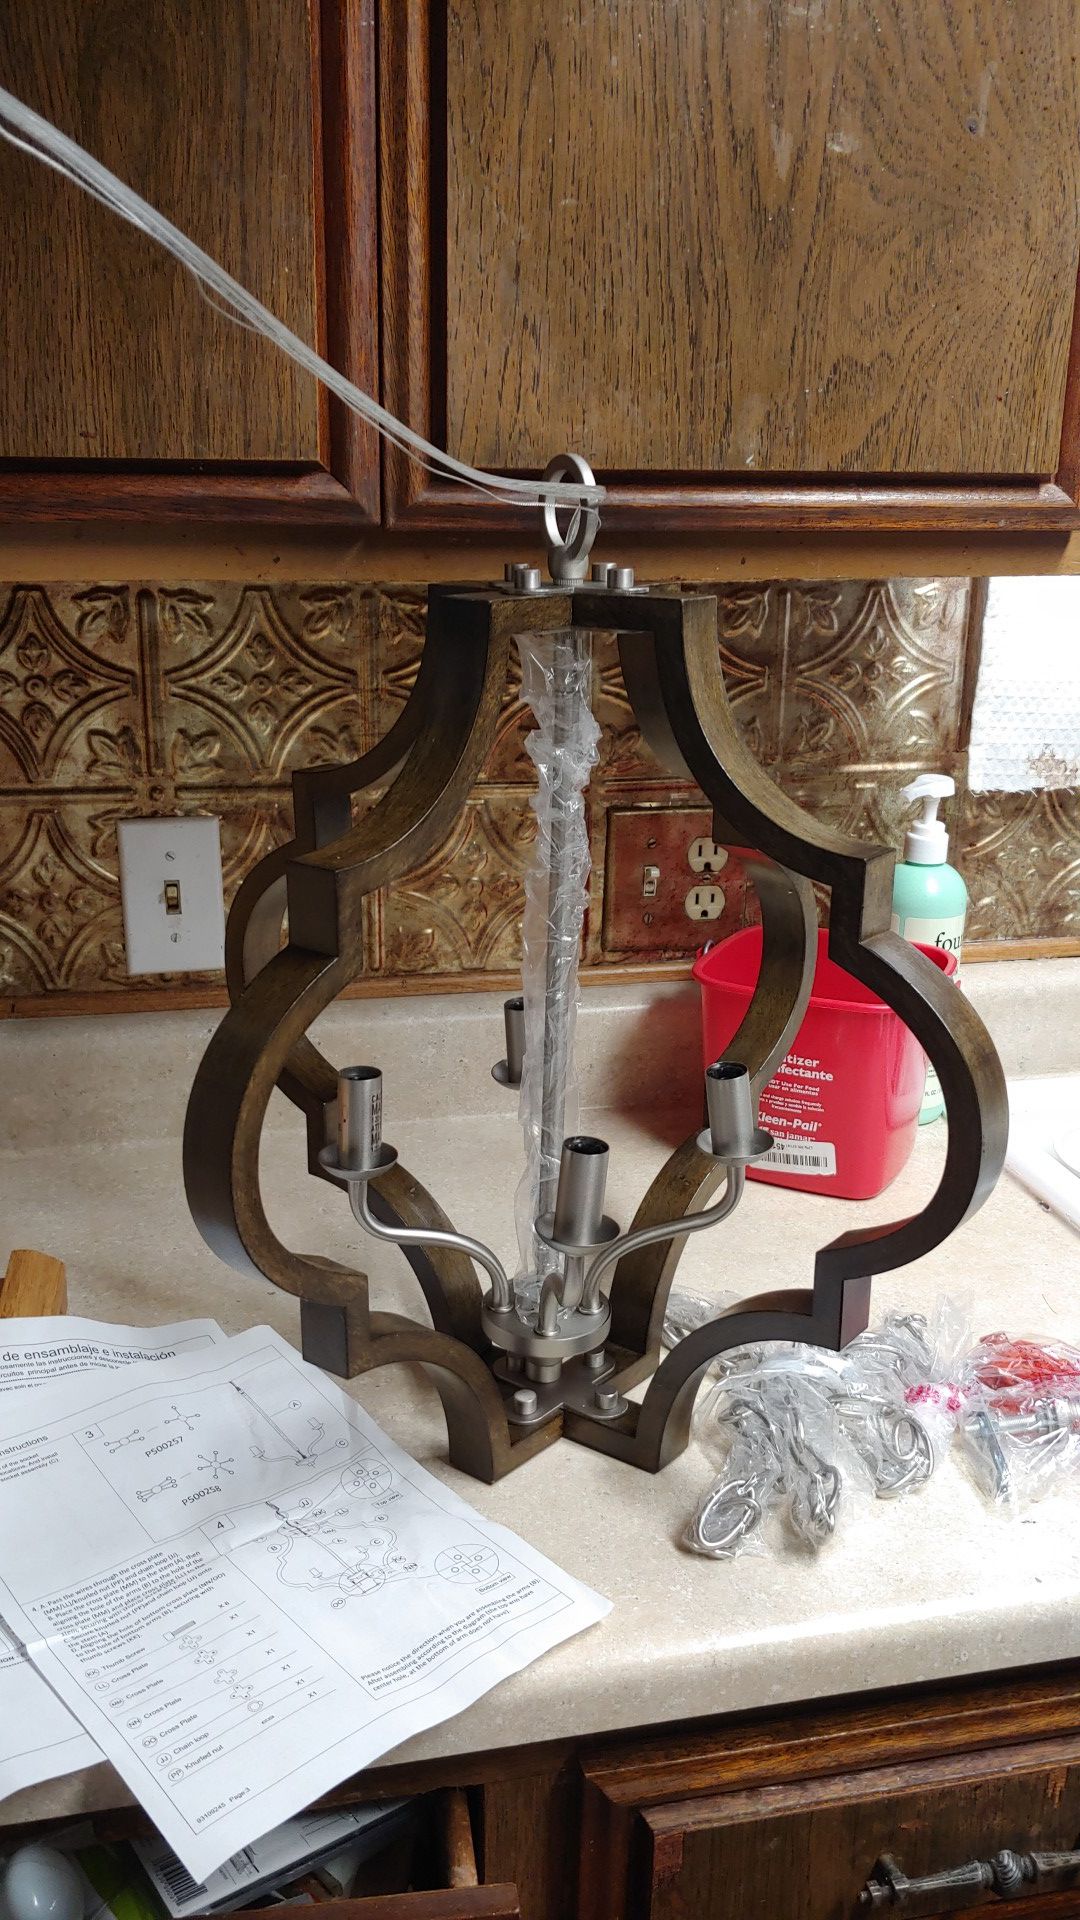 Chandelier it comes with Hardware ready to install it comes with the chain so you can cover the wire